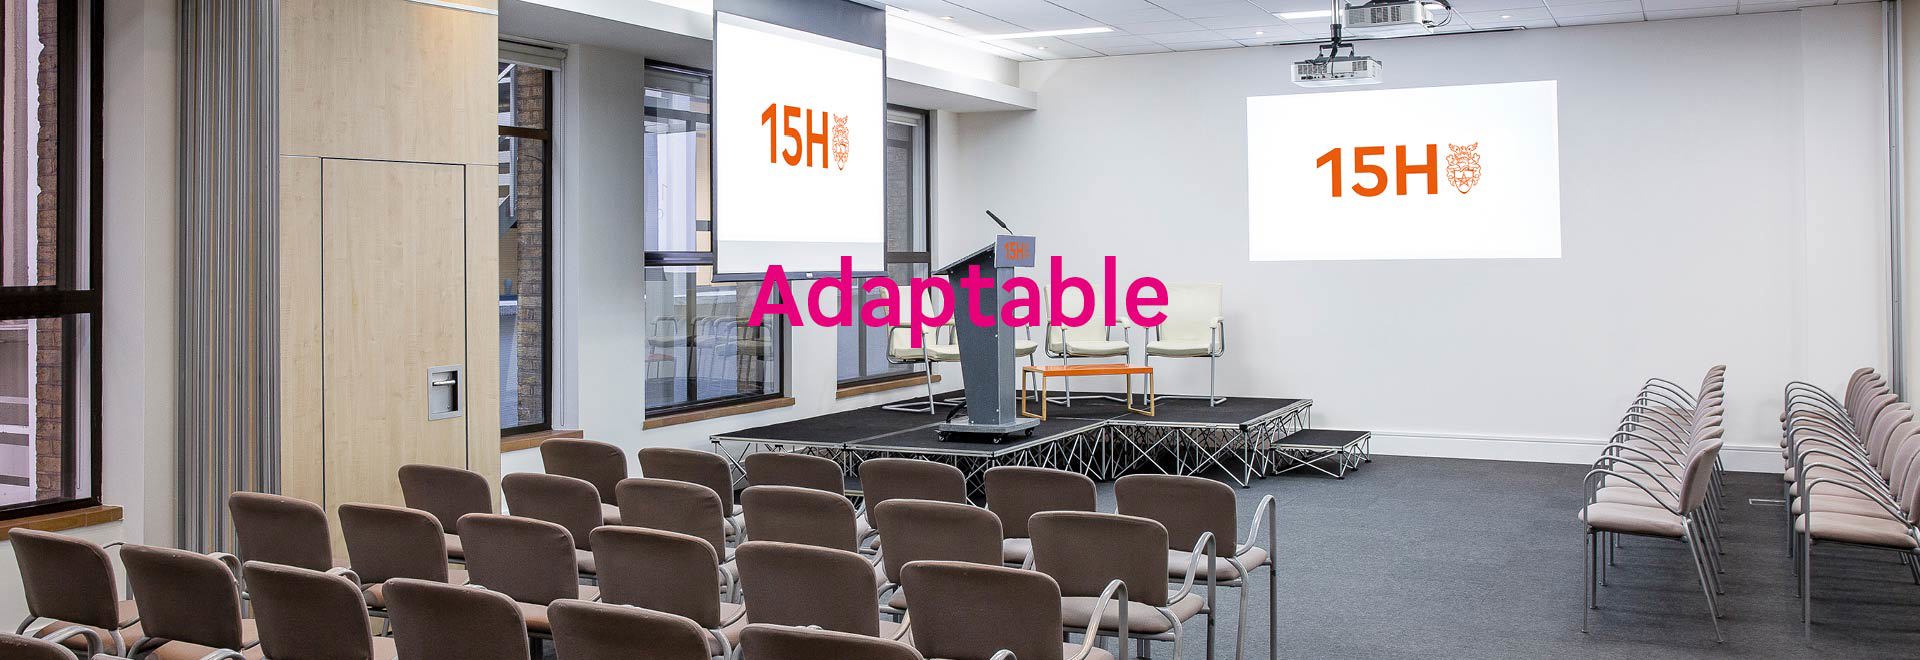 15Hatfields conference room with the word 'Adaptable'